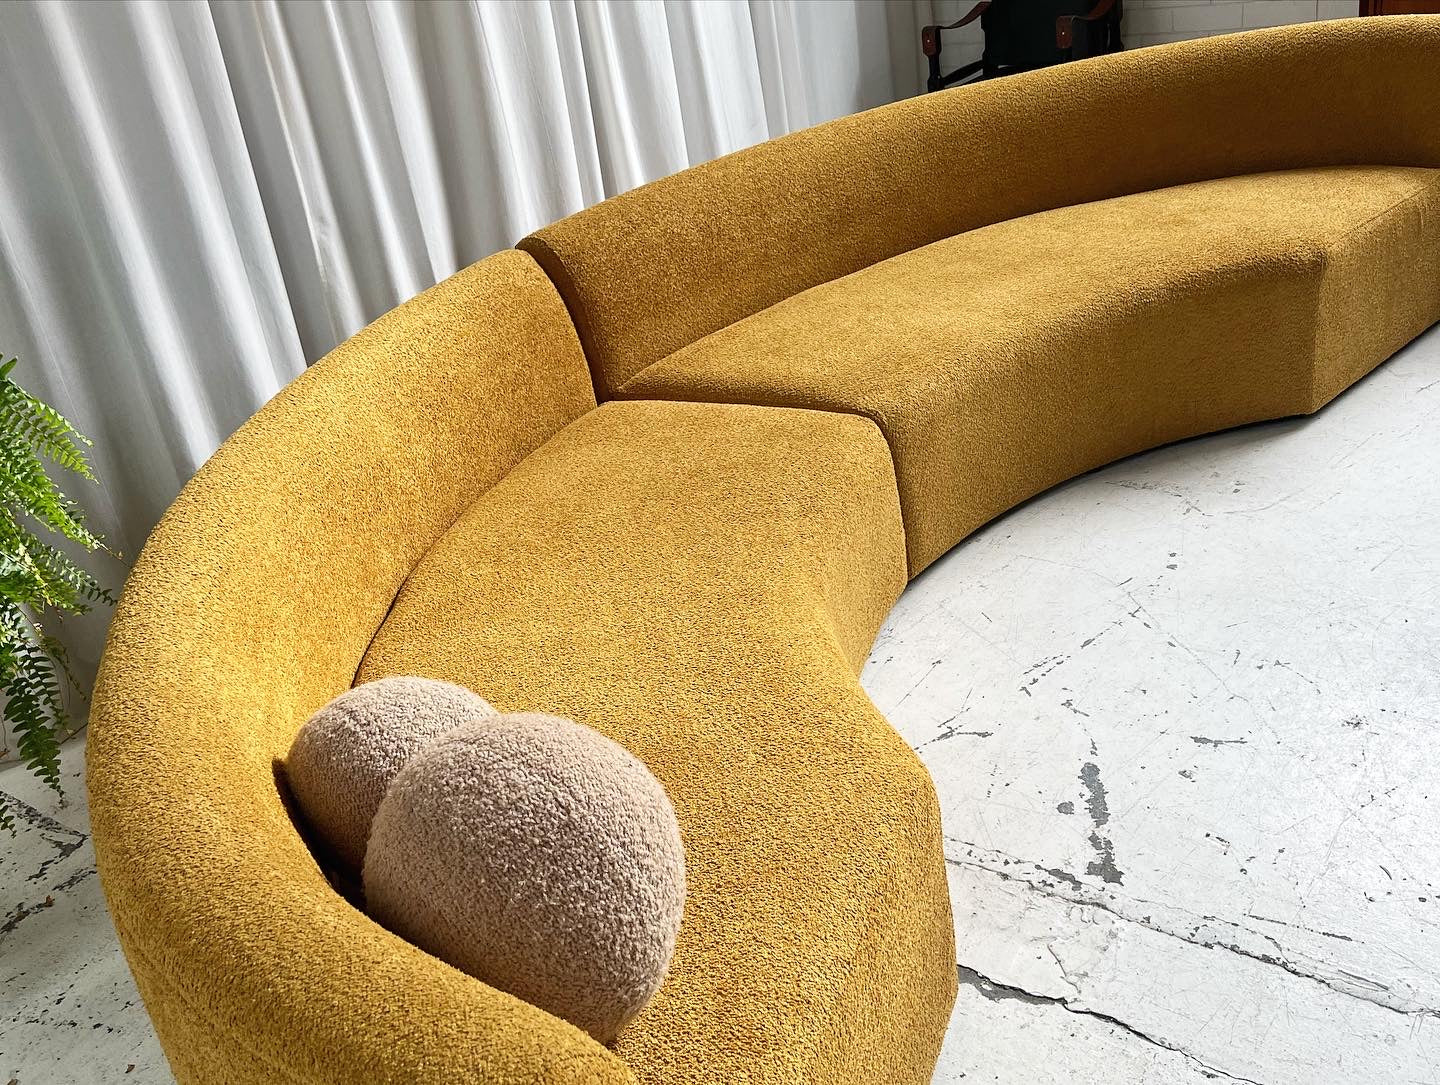 Two Piece Curved Mustard Sofa